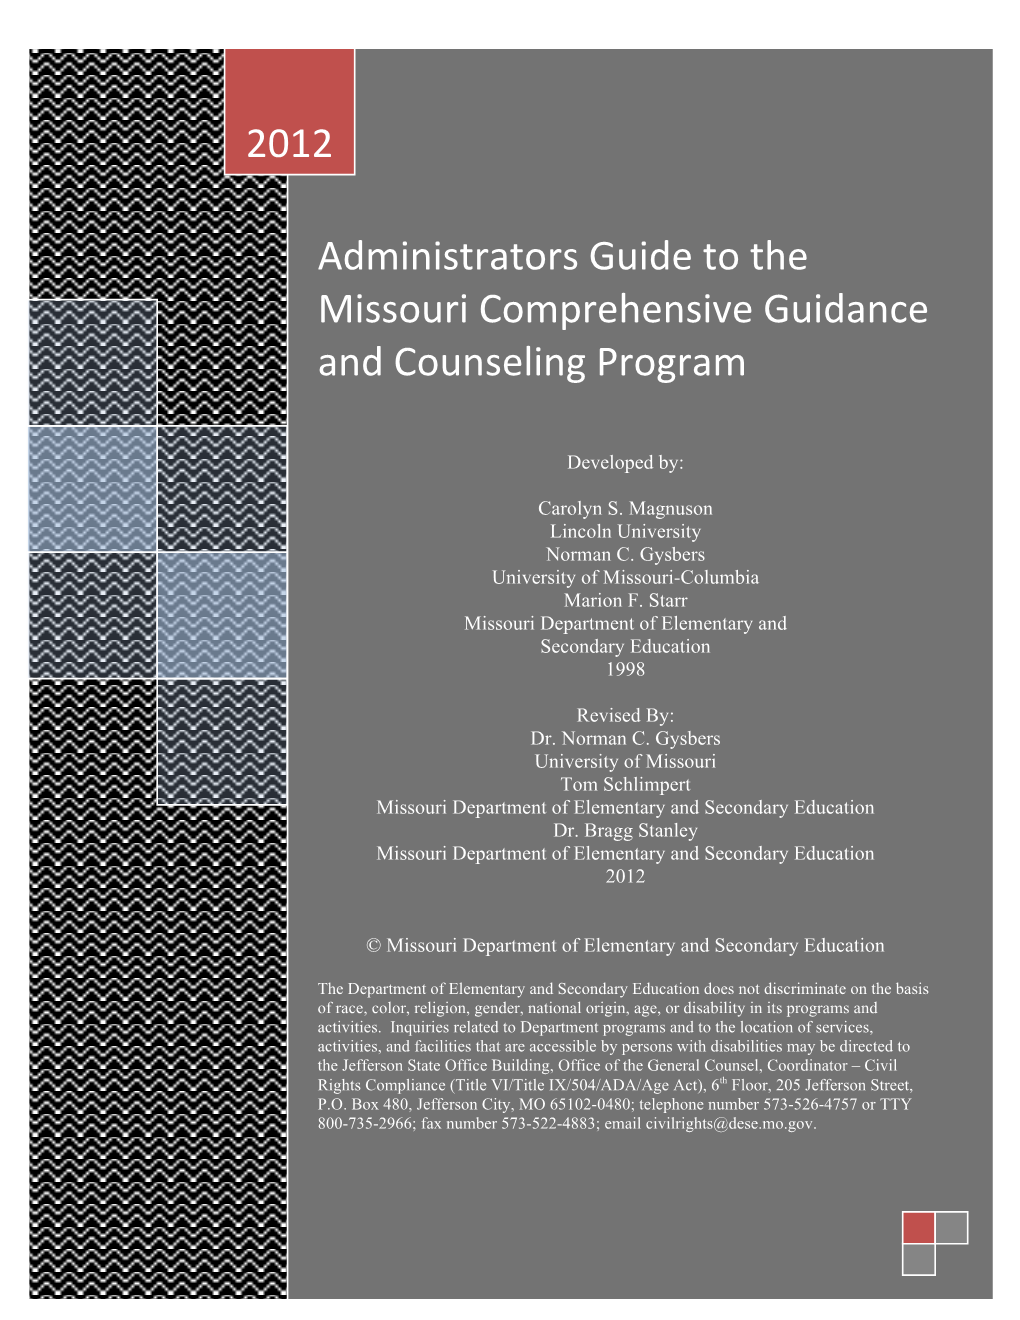 Administrators Guide to the Missouri Comprehensive Guidance and Counseling Program